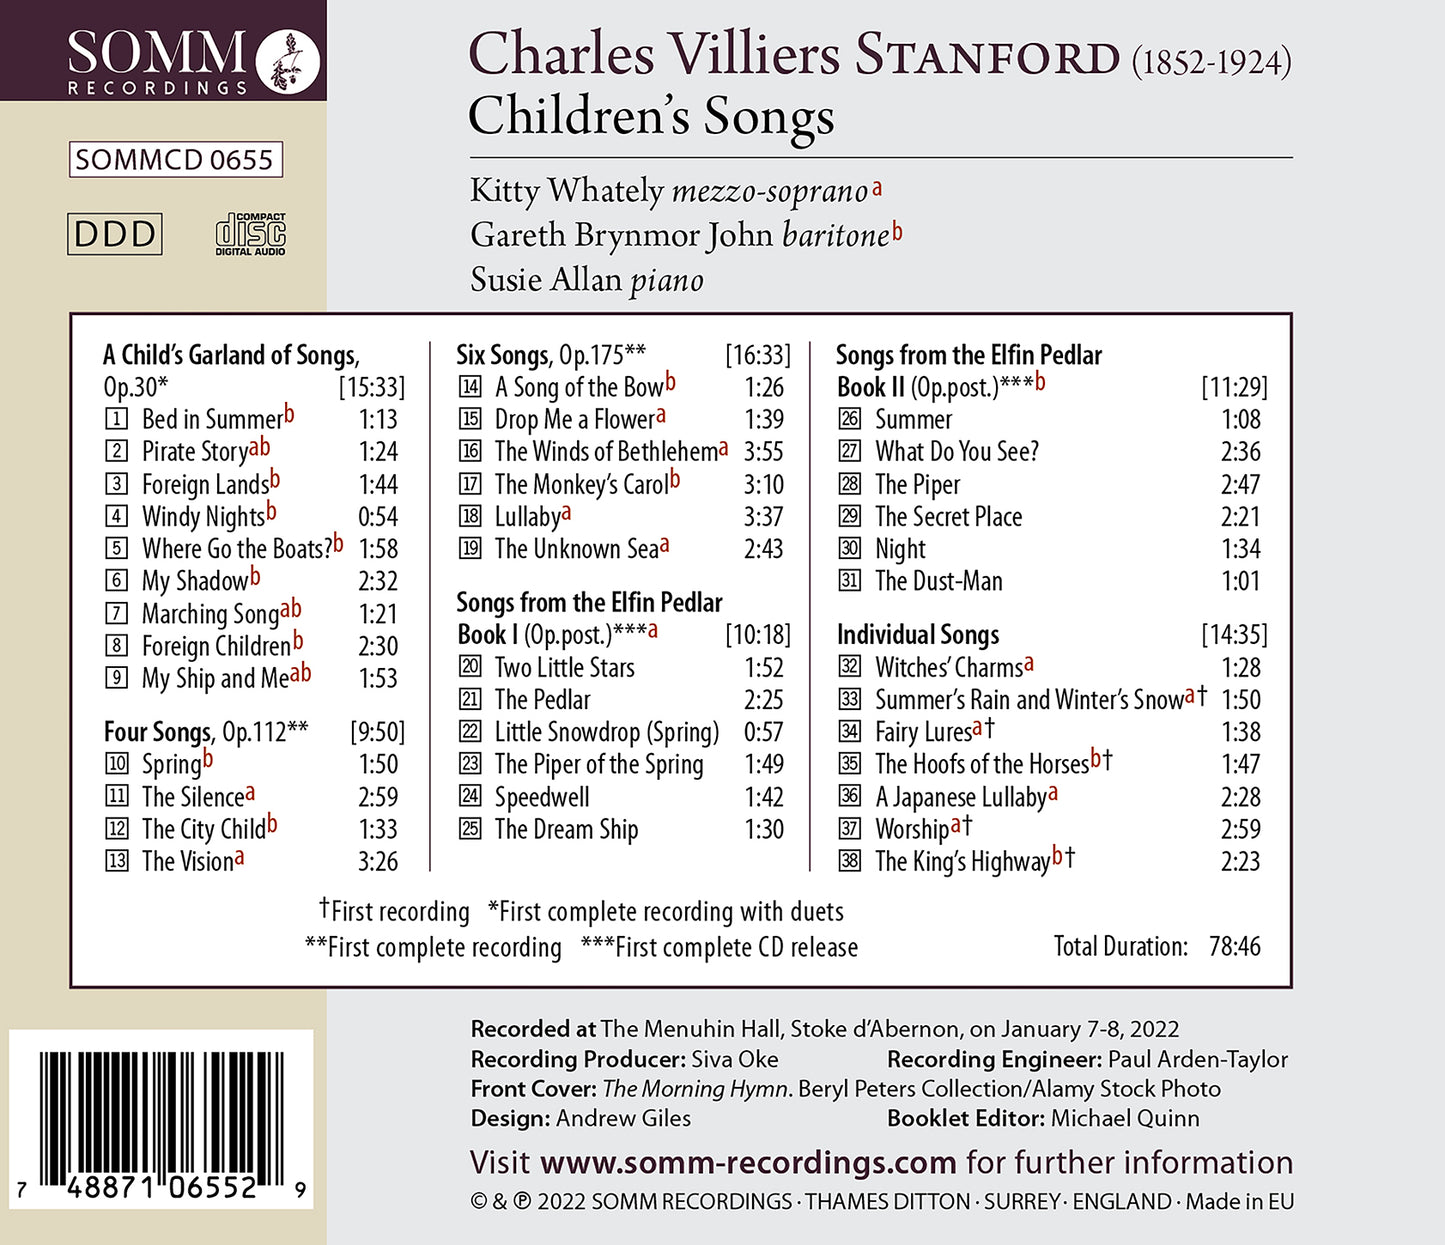 Stanford: Children's Songs including First Recordings / Kitty Whately